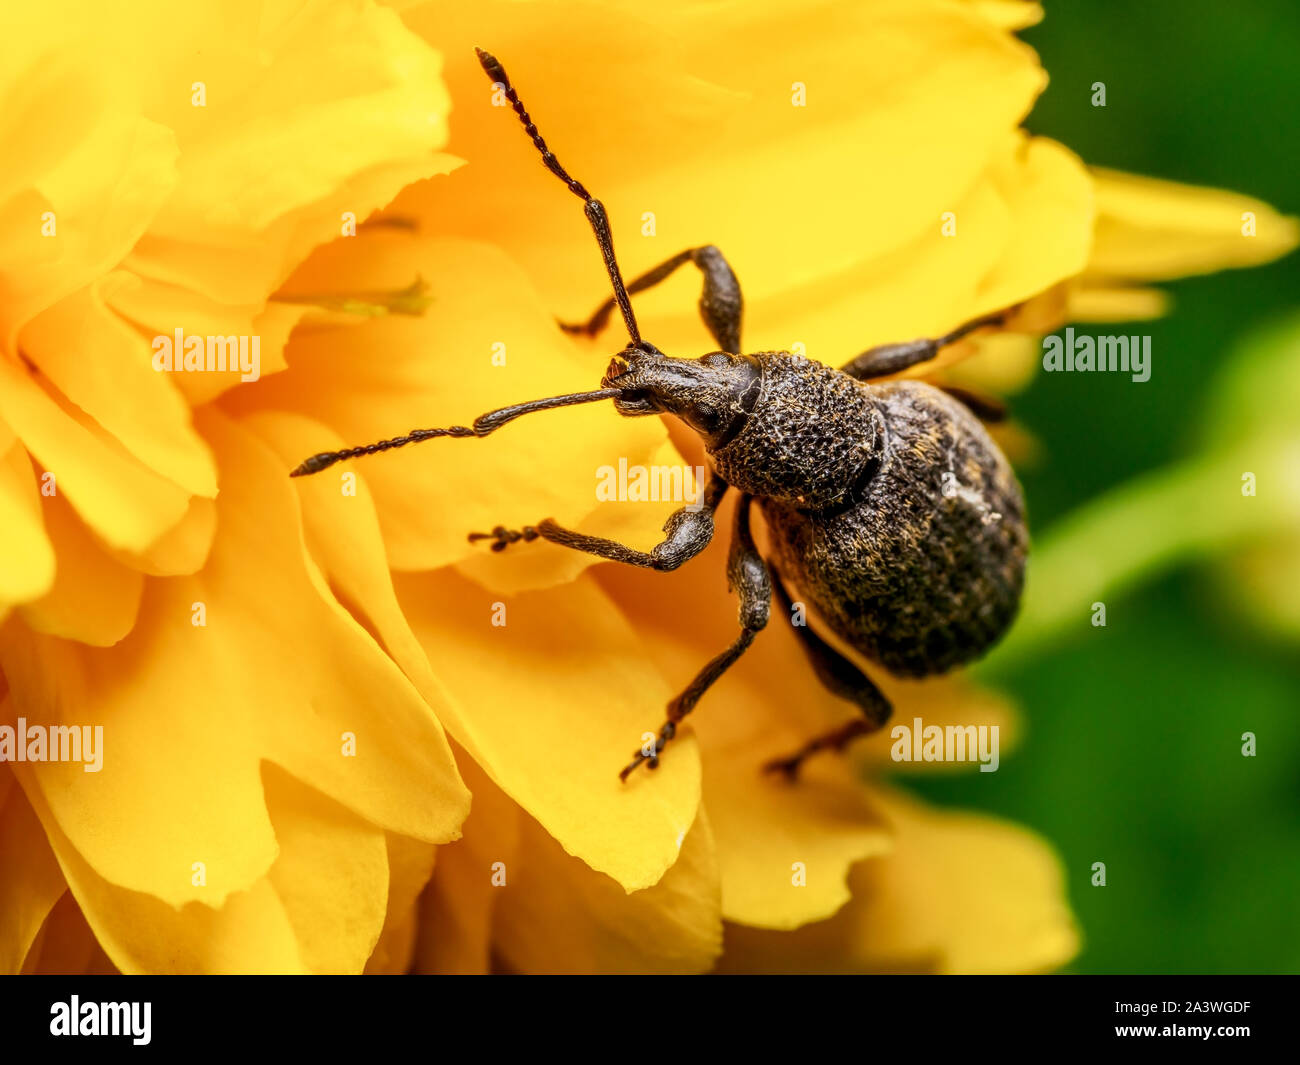 An adult vine weevil (Otiorhynchus sulcatus) makes its way across a flower head Stock Photo